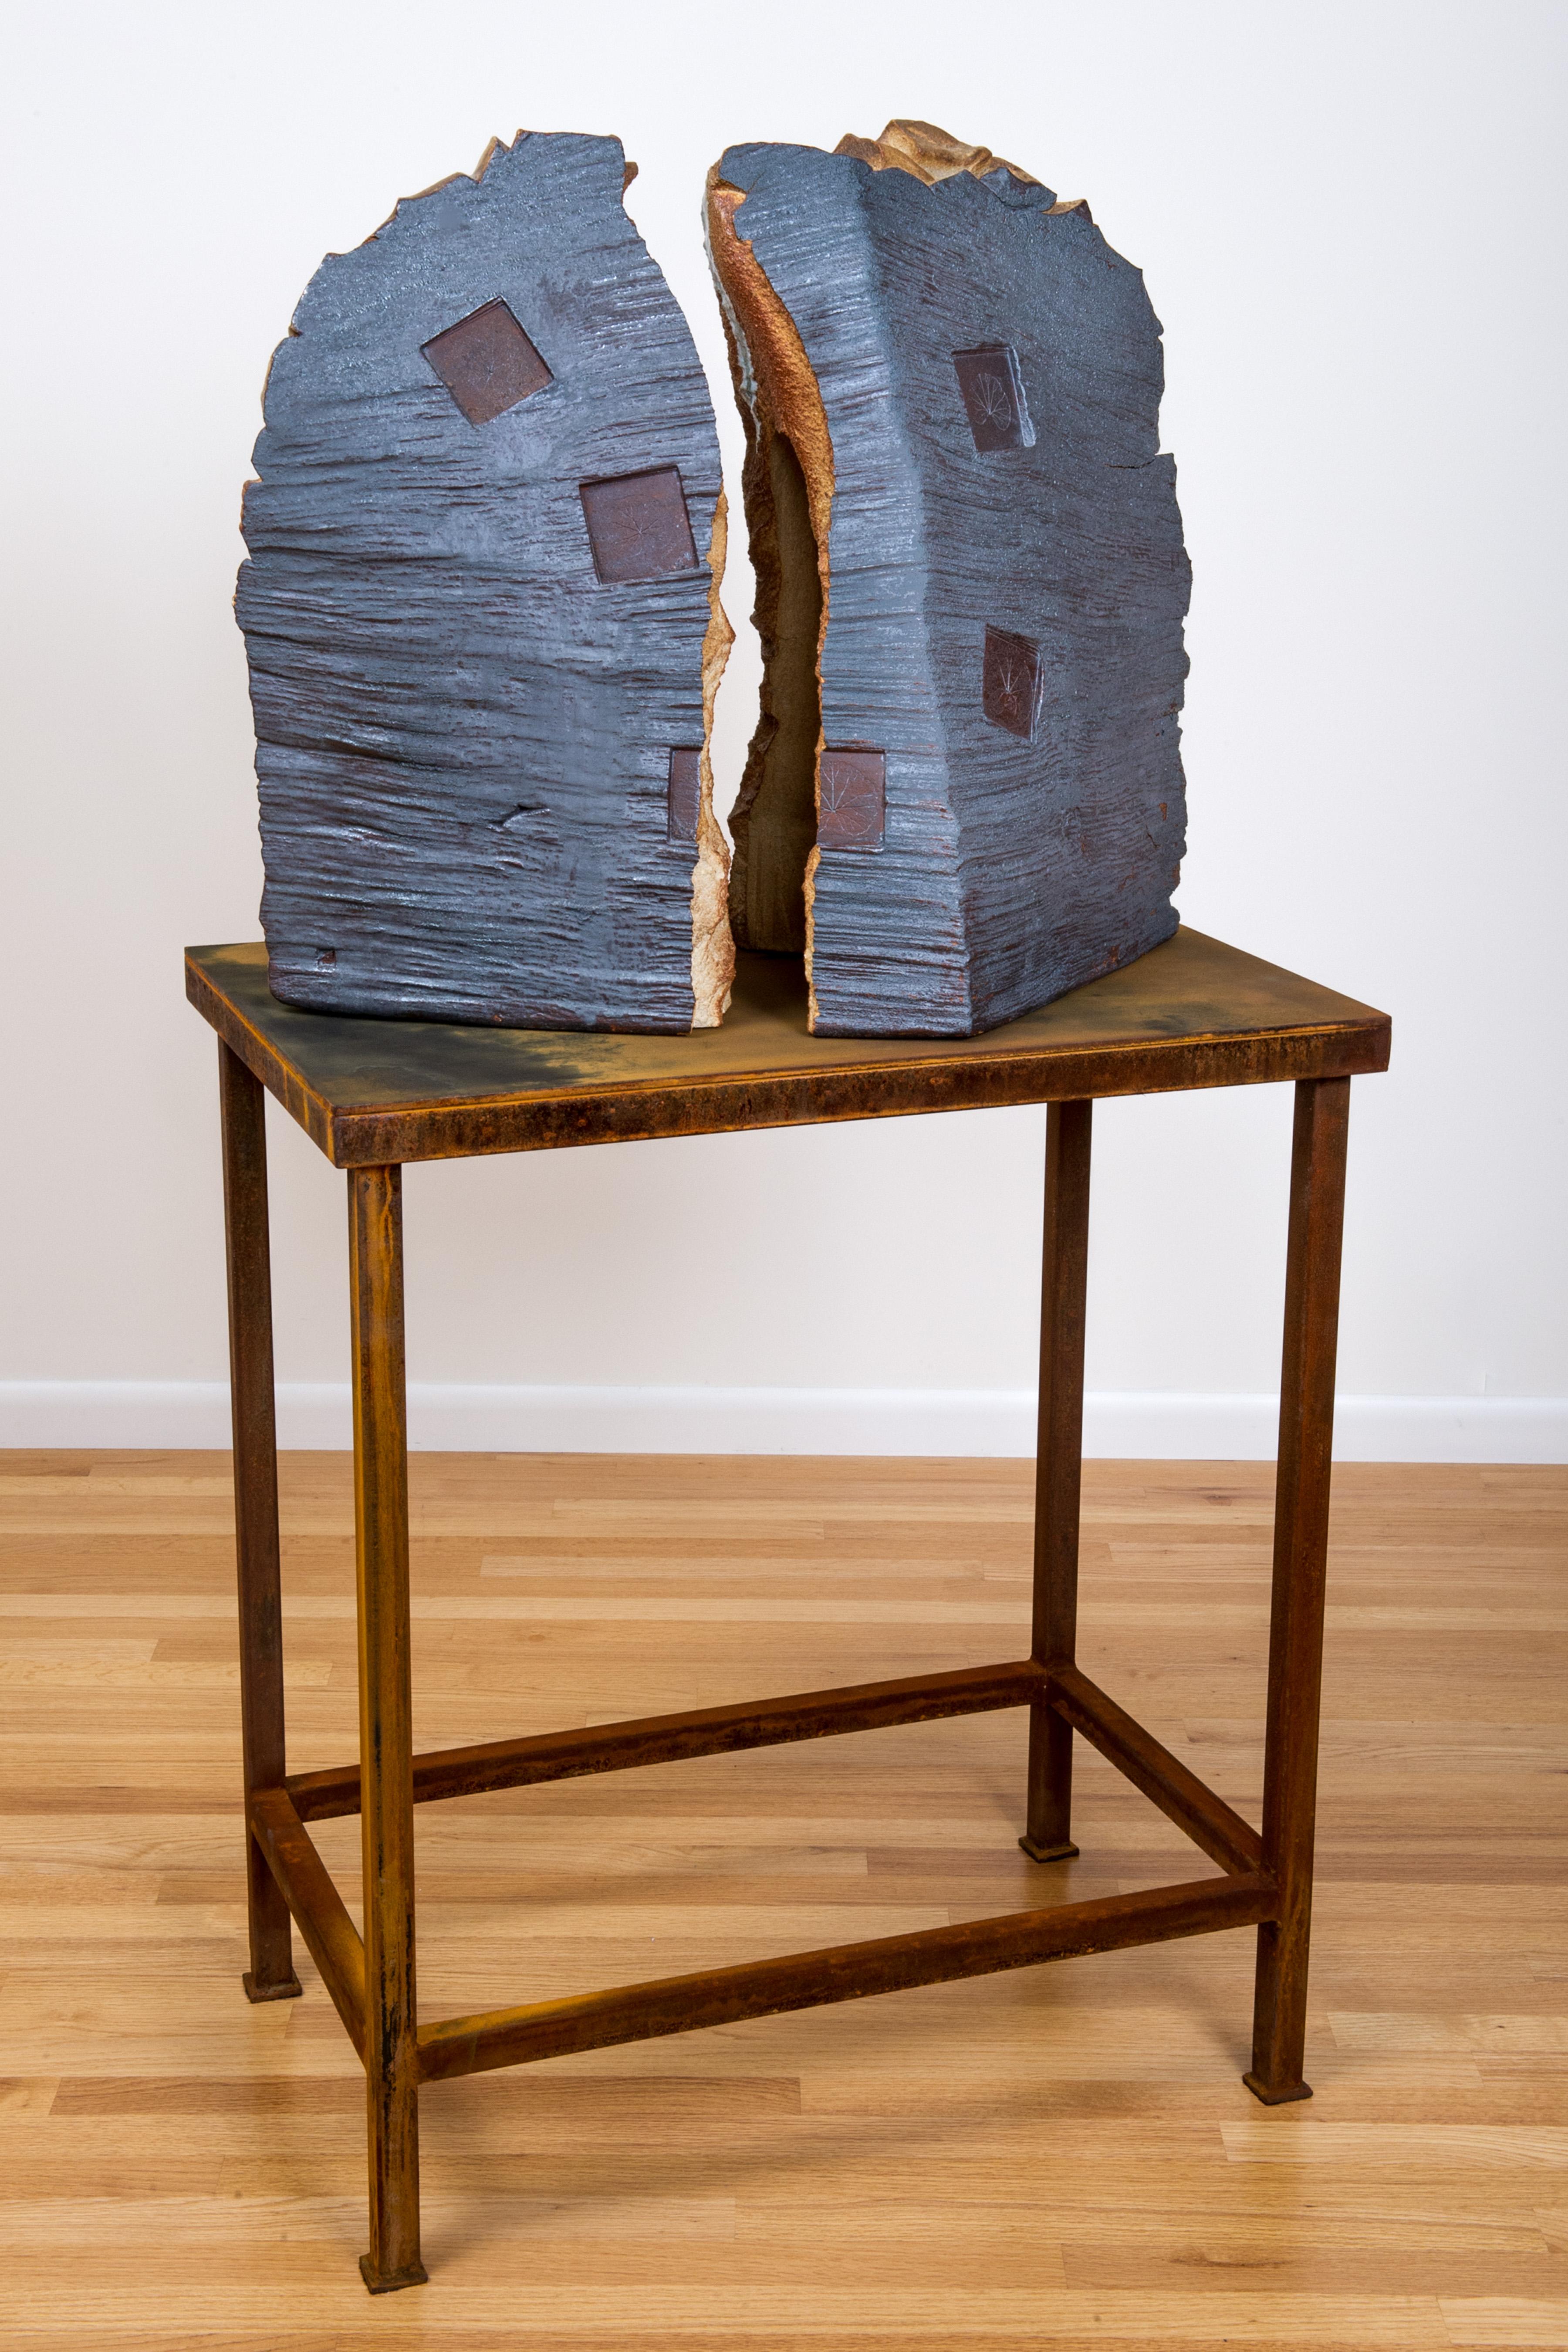 Large scale wood-fired ceramic sculpture: 'Voice ' - Sculpture by Tony Moore